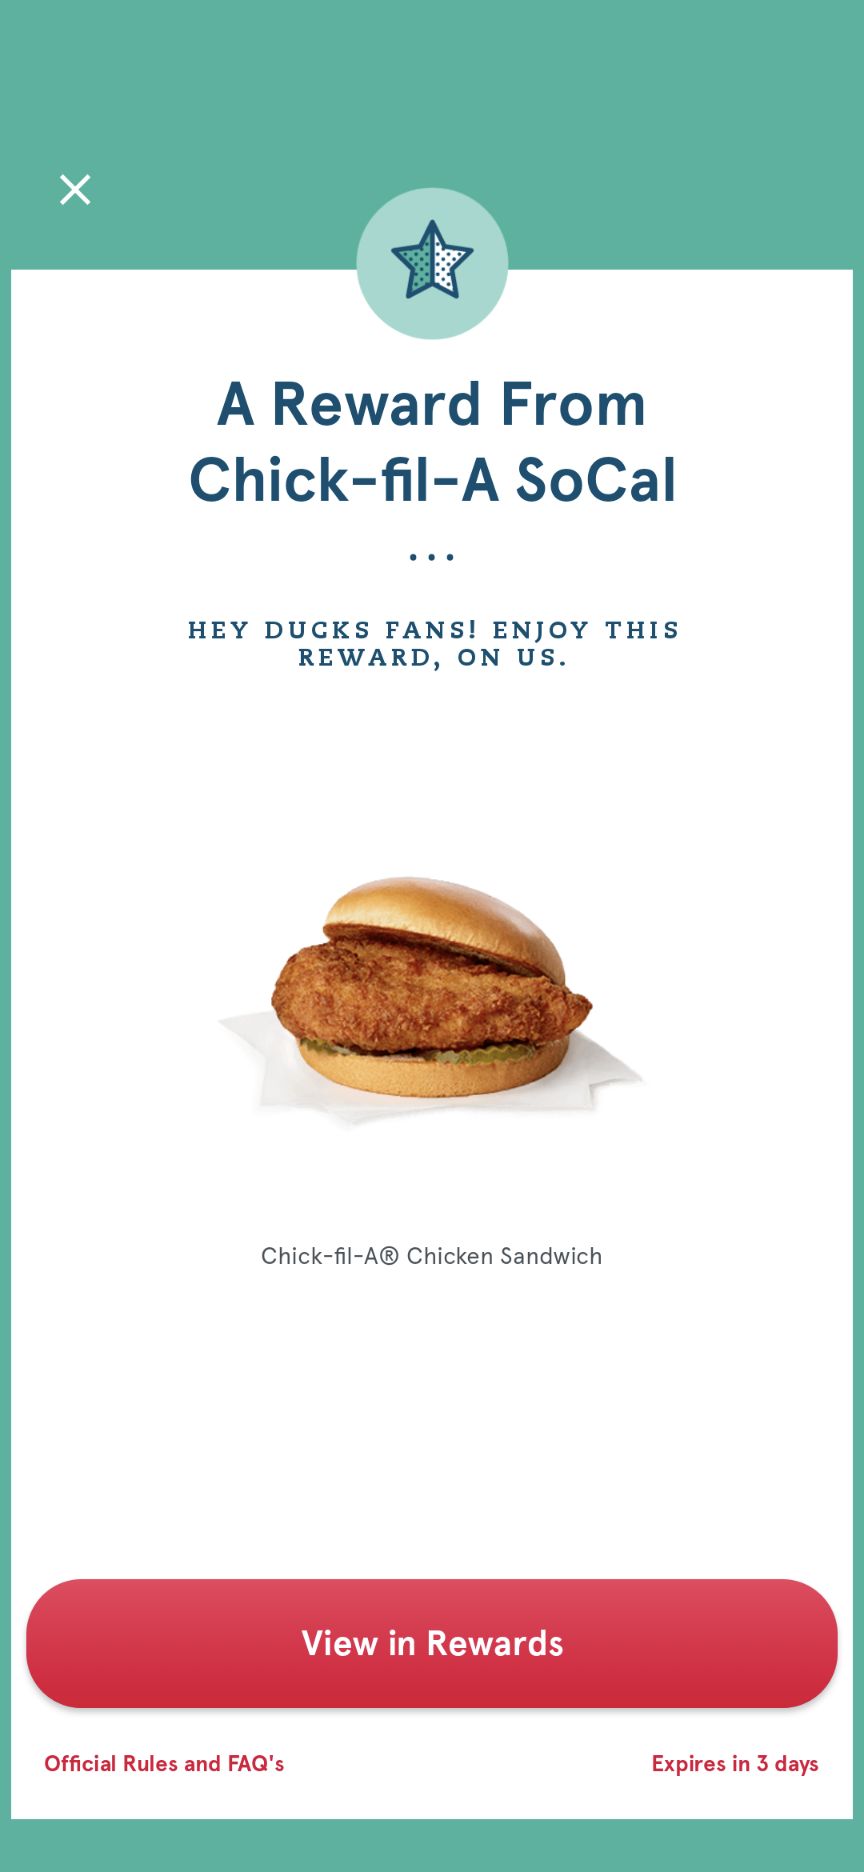 Select SoCal Residents Only: Chick-fil-A App: Free Original Chicken Sandwich (Claim Reward by 10:30AM, Then Redeem Reward by Tue)